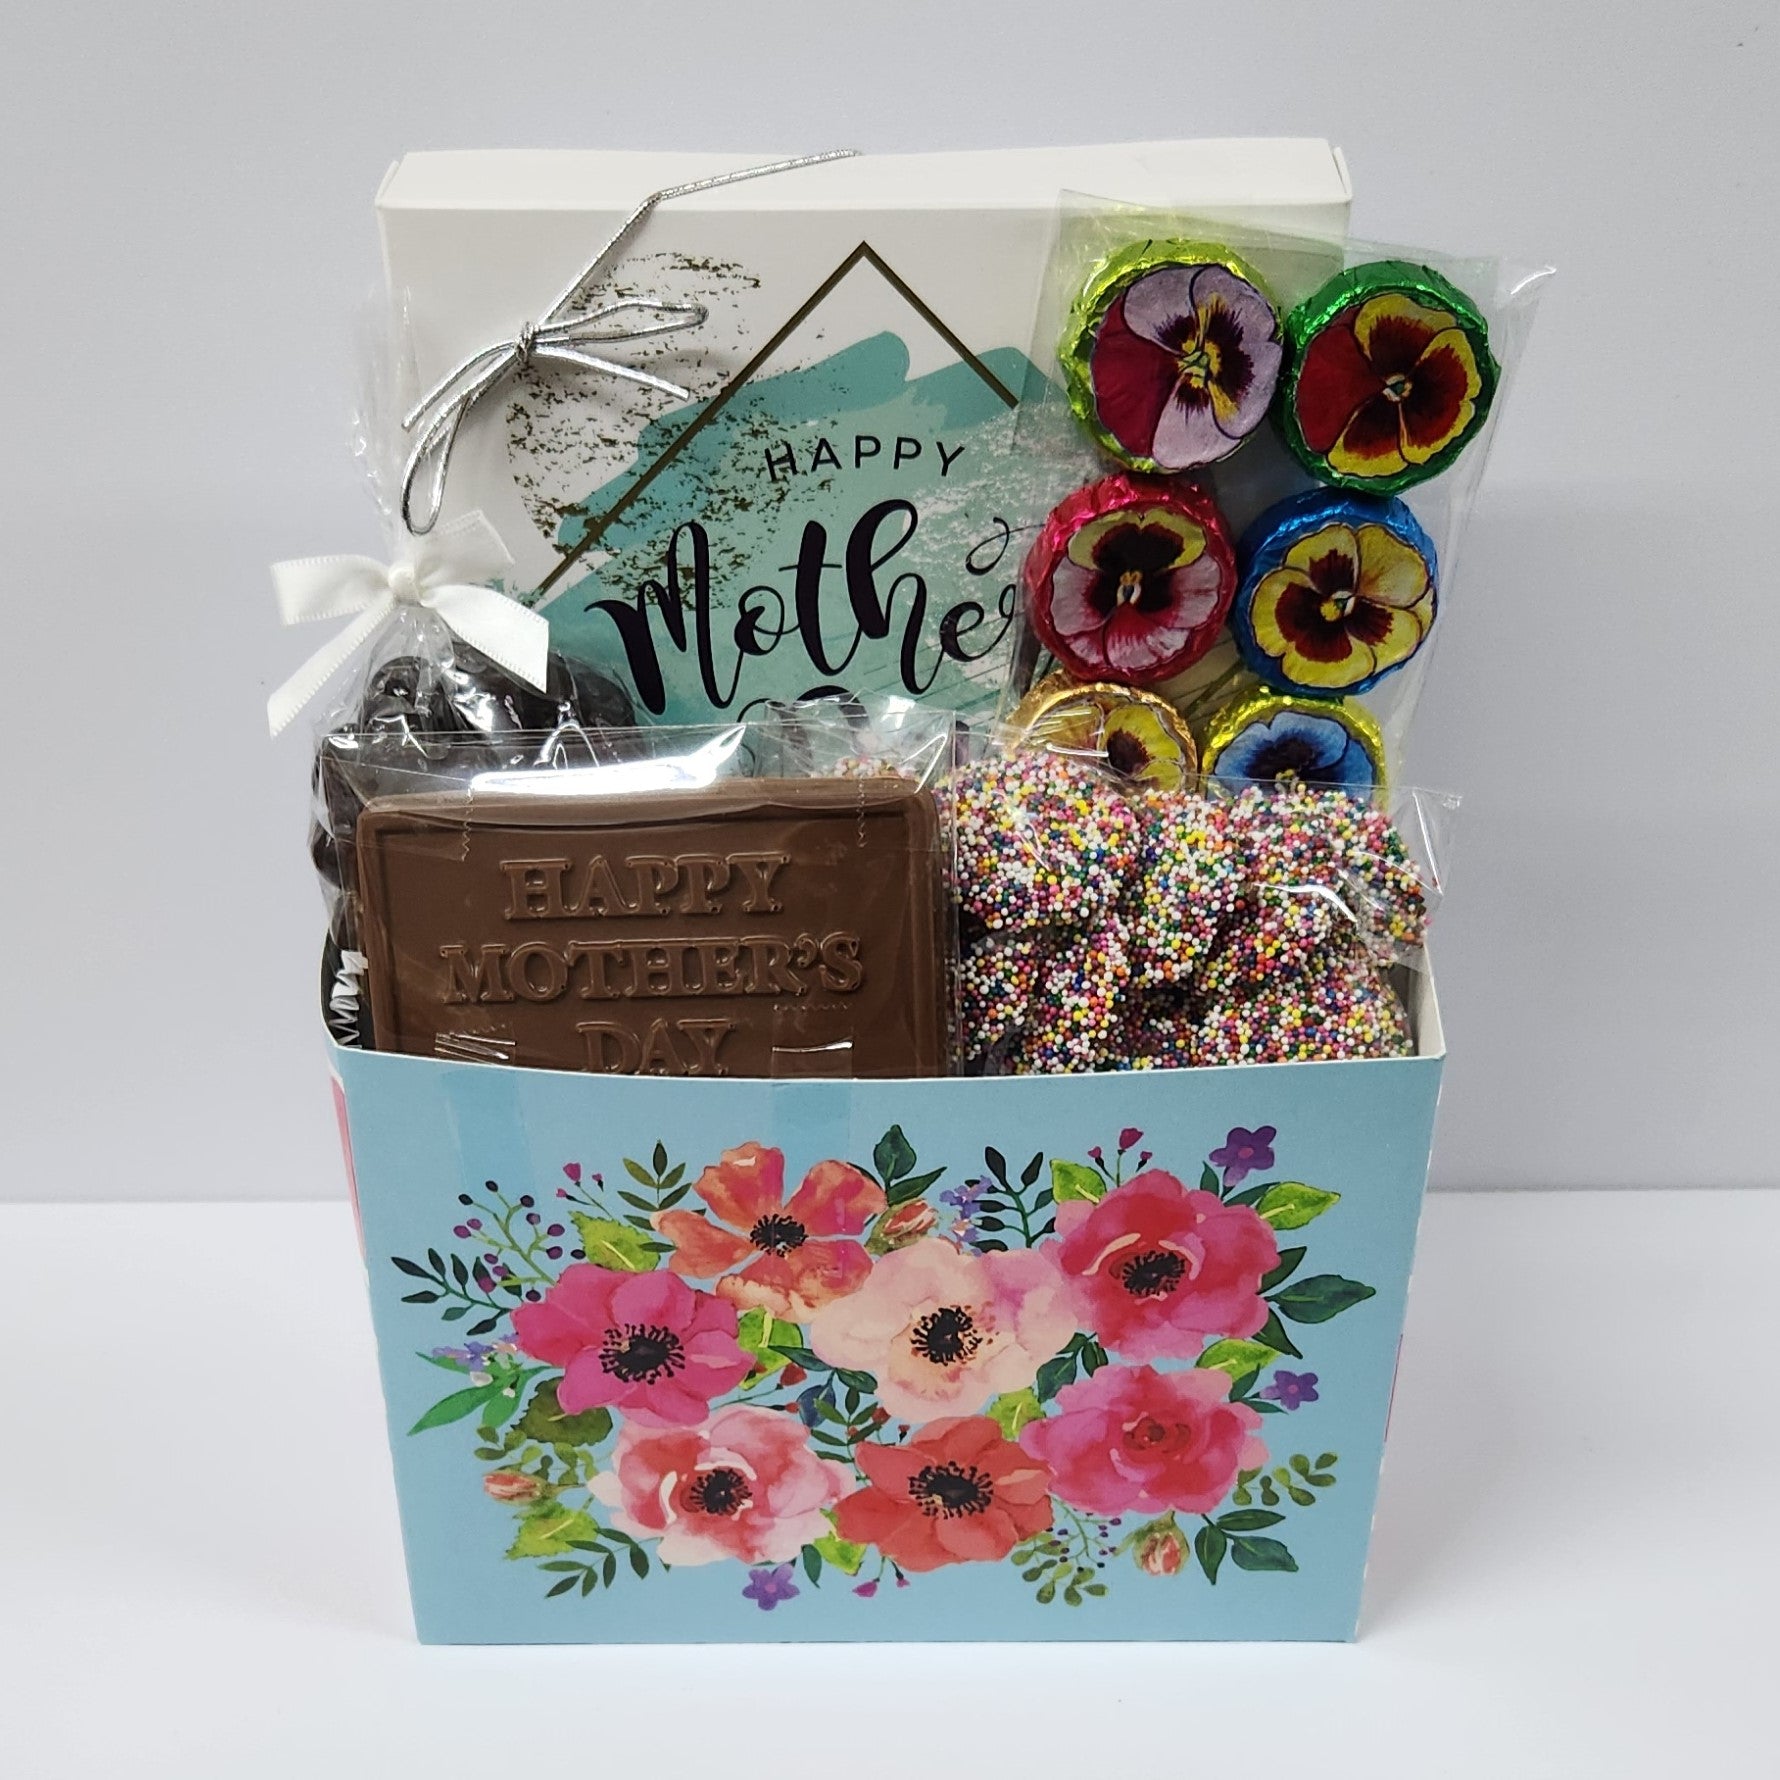 Watercolor Flowers Mother's Day Gift Basket featuring 16 piece assortment with creams, caramels, meltaways and truffles, milk chocolate foiled flowers, milk chocolate nonpareils, dark chocolate covered cranberries, and a chocolate card with the saying "Happy Mother's Day"